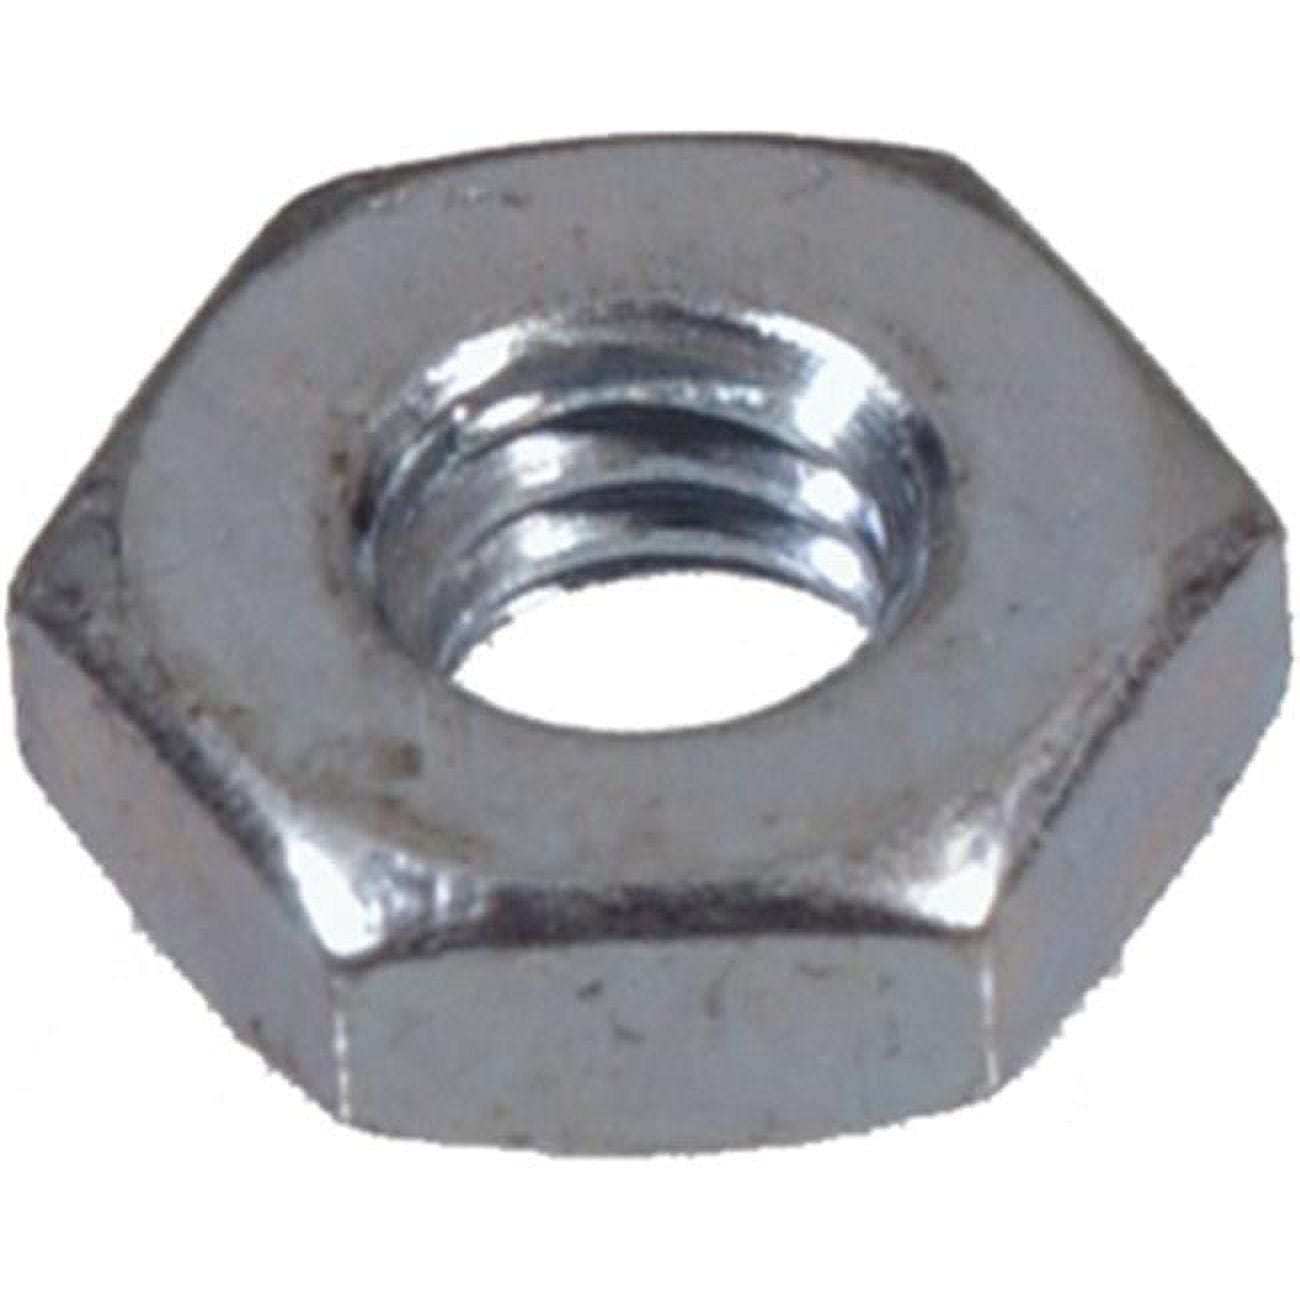 140018 No.8-32 In. Zinc Plated Hex Machine Screw Nuts - Pack Of 100